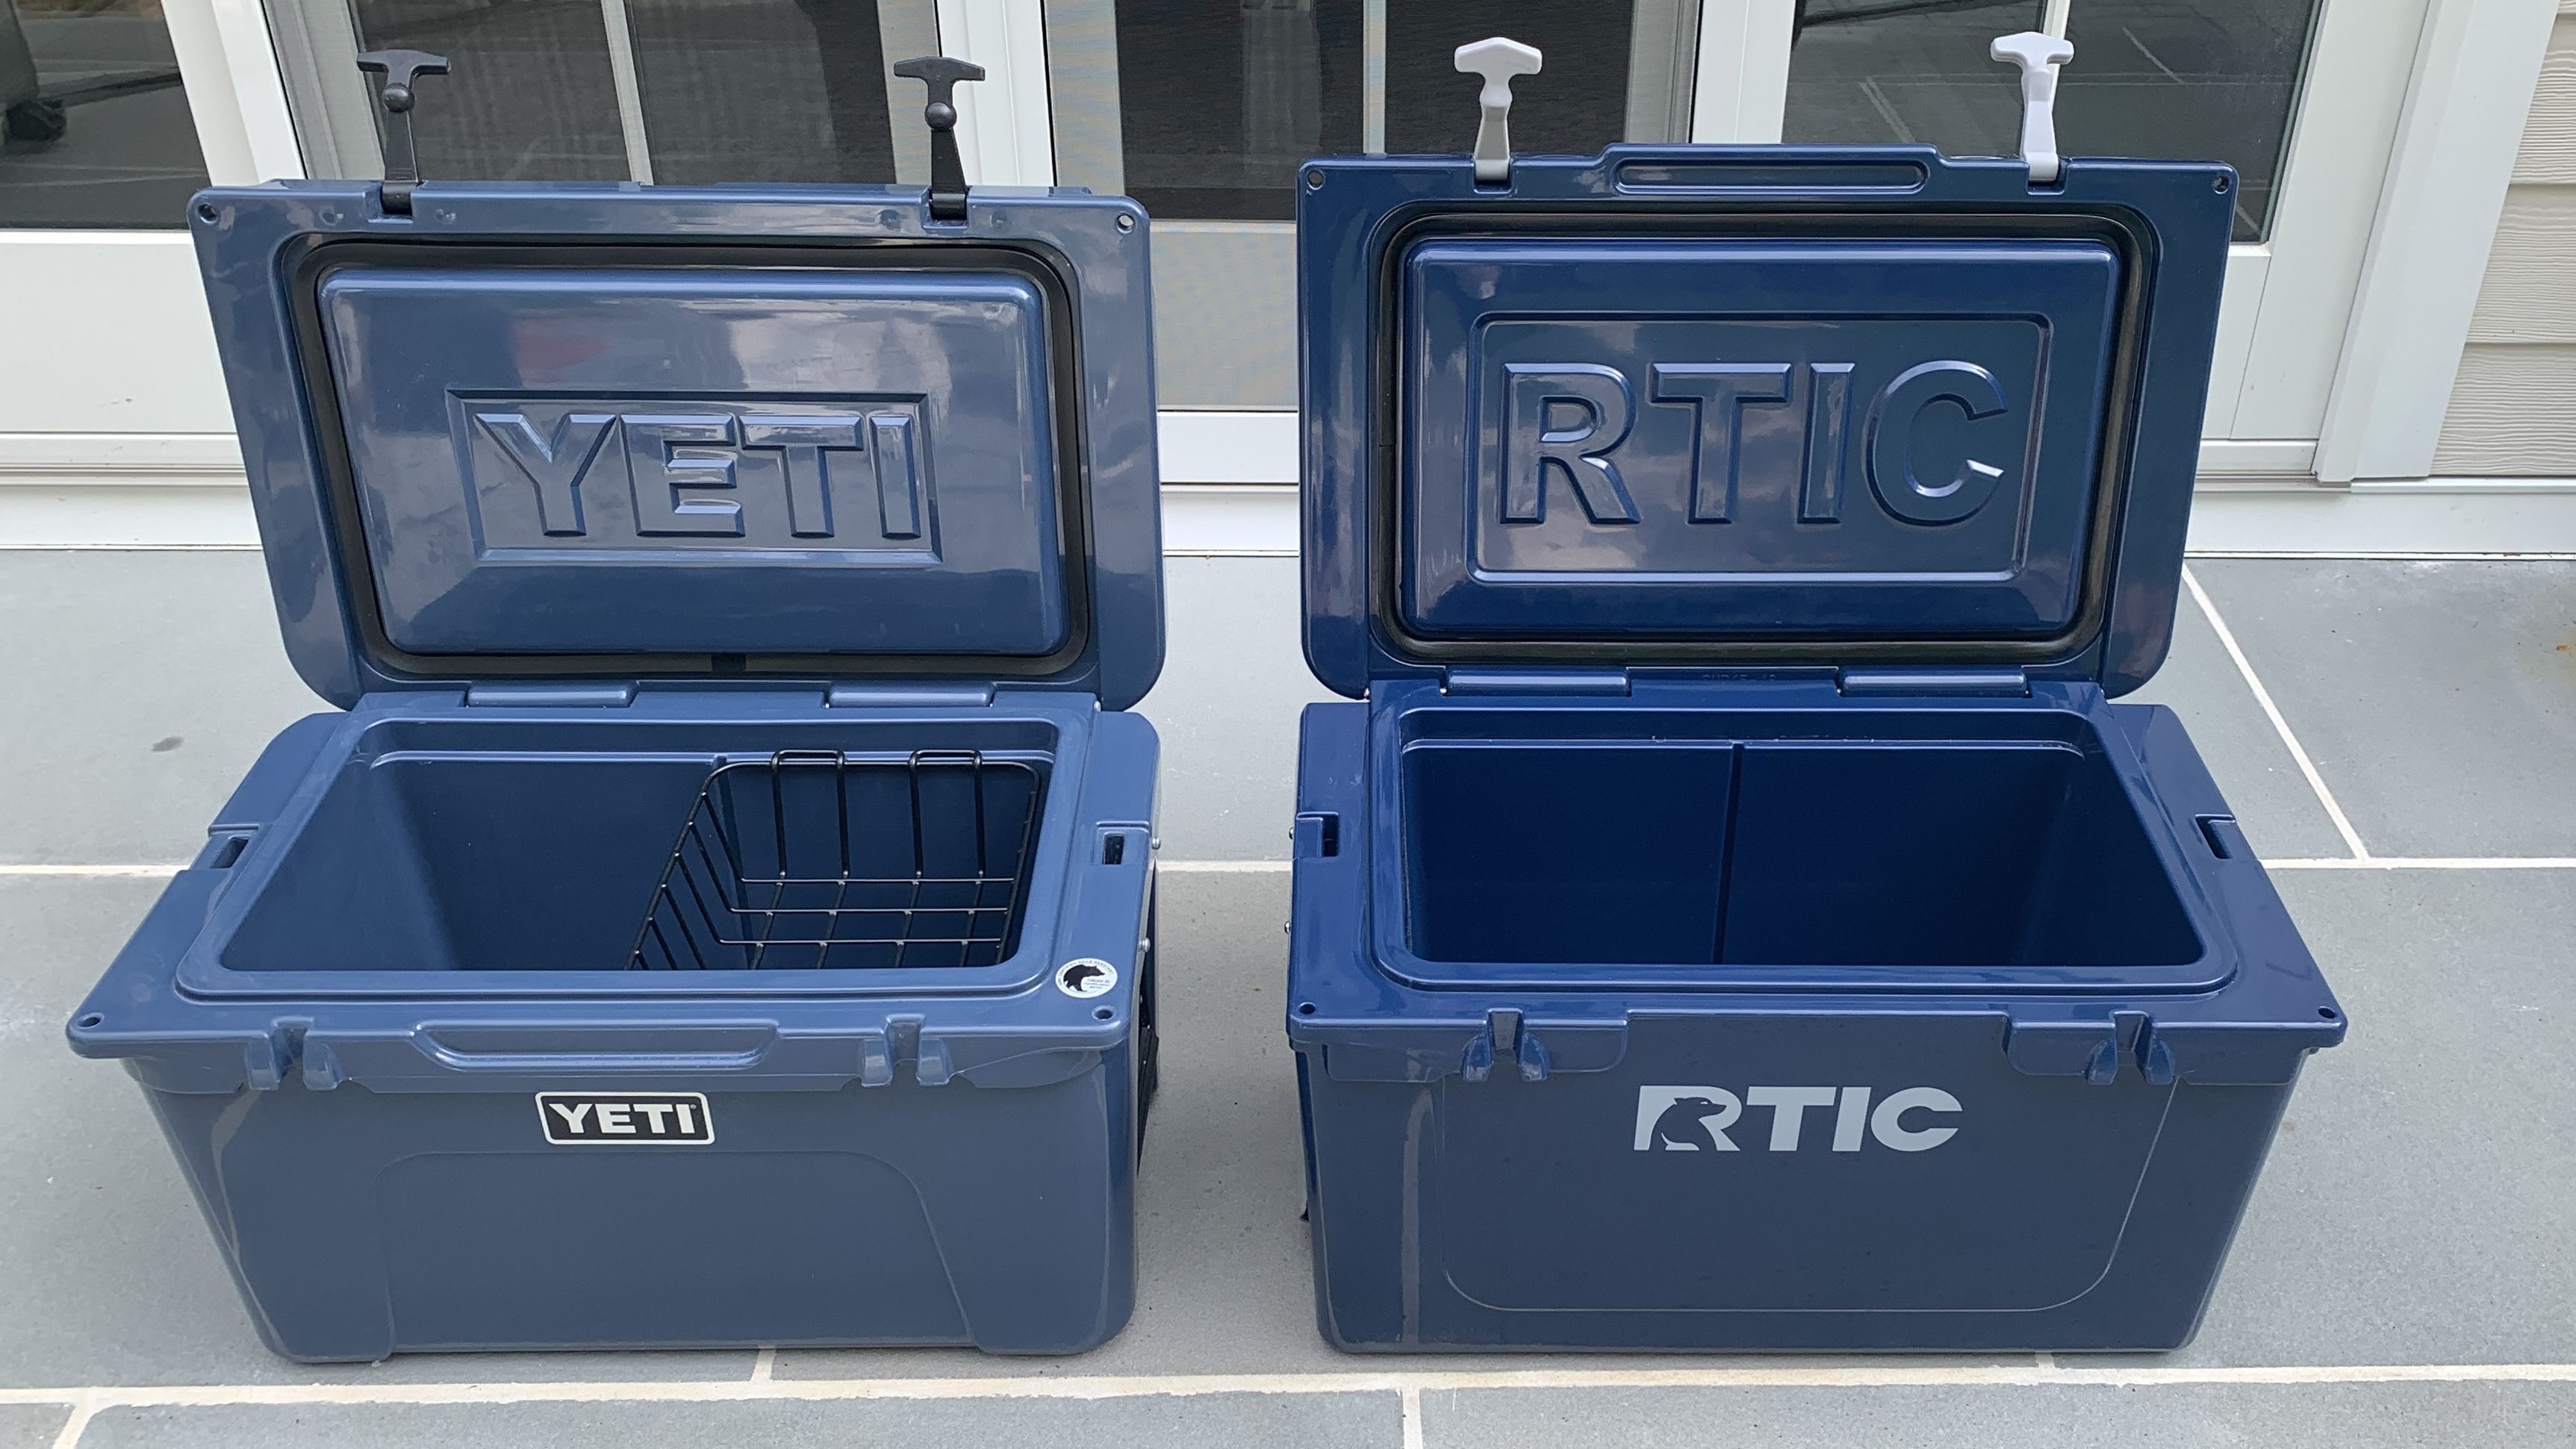 RTIC Cooler Review: Can This More Affordable Cooler Keep Ice?